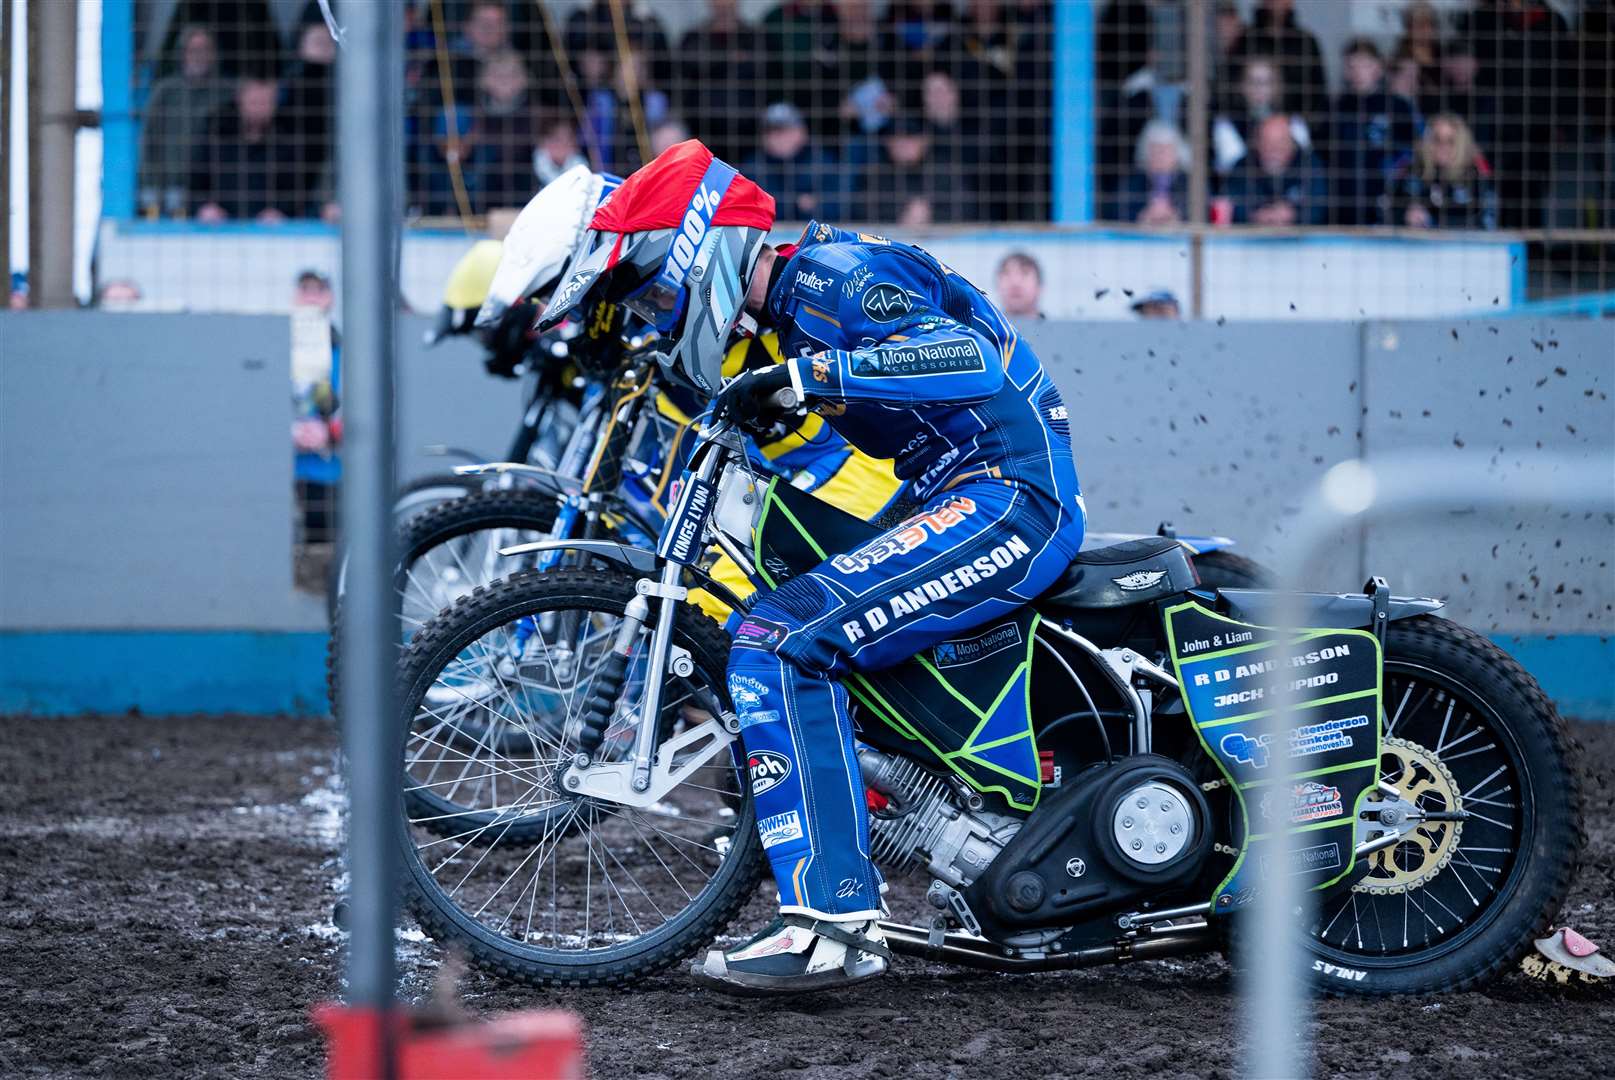 The King's Lynn Stars against Sheffield Tigers at the Adrian Flux Arena on Thursday night.